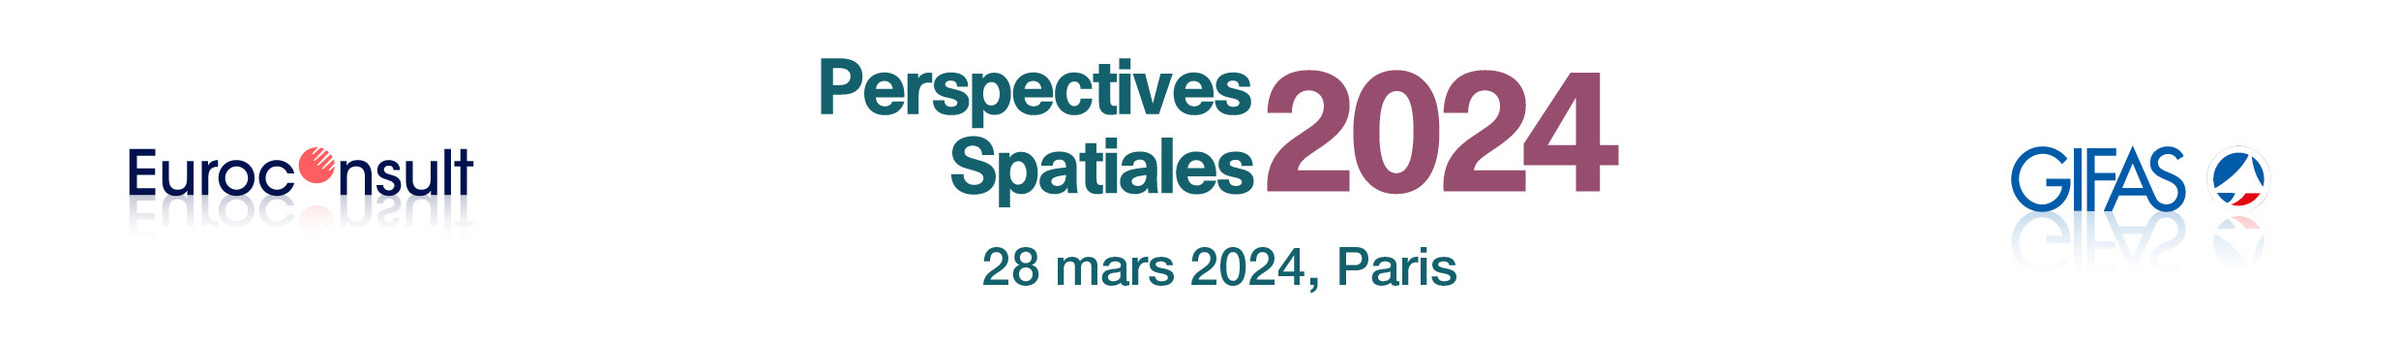 Perspectives Spatiales 2024